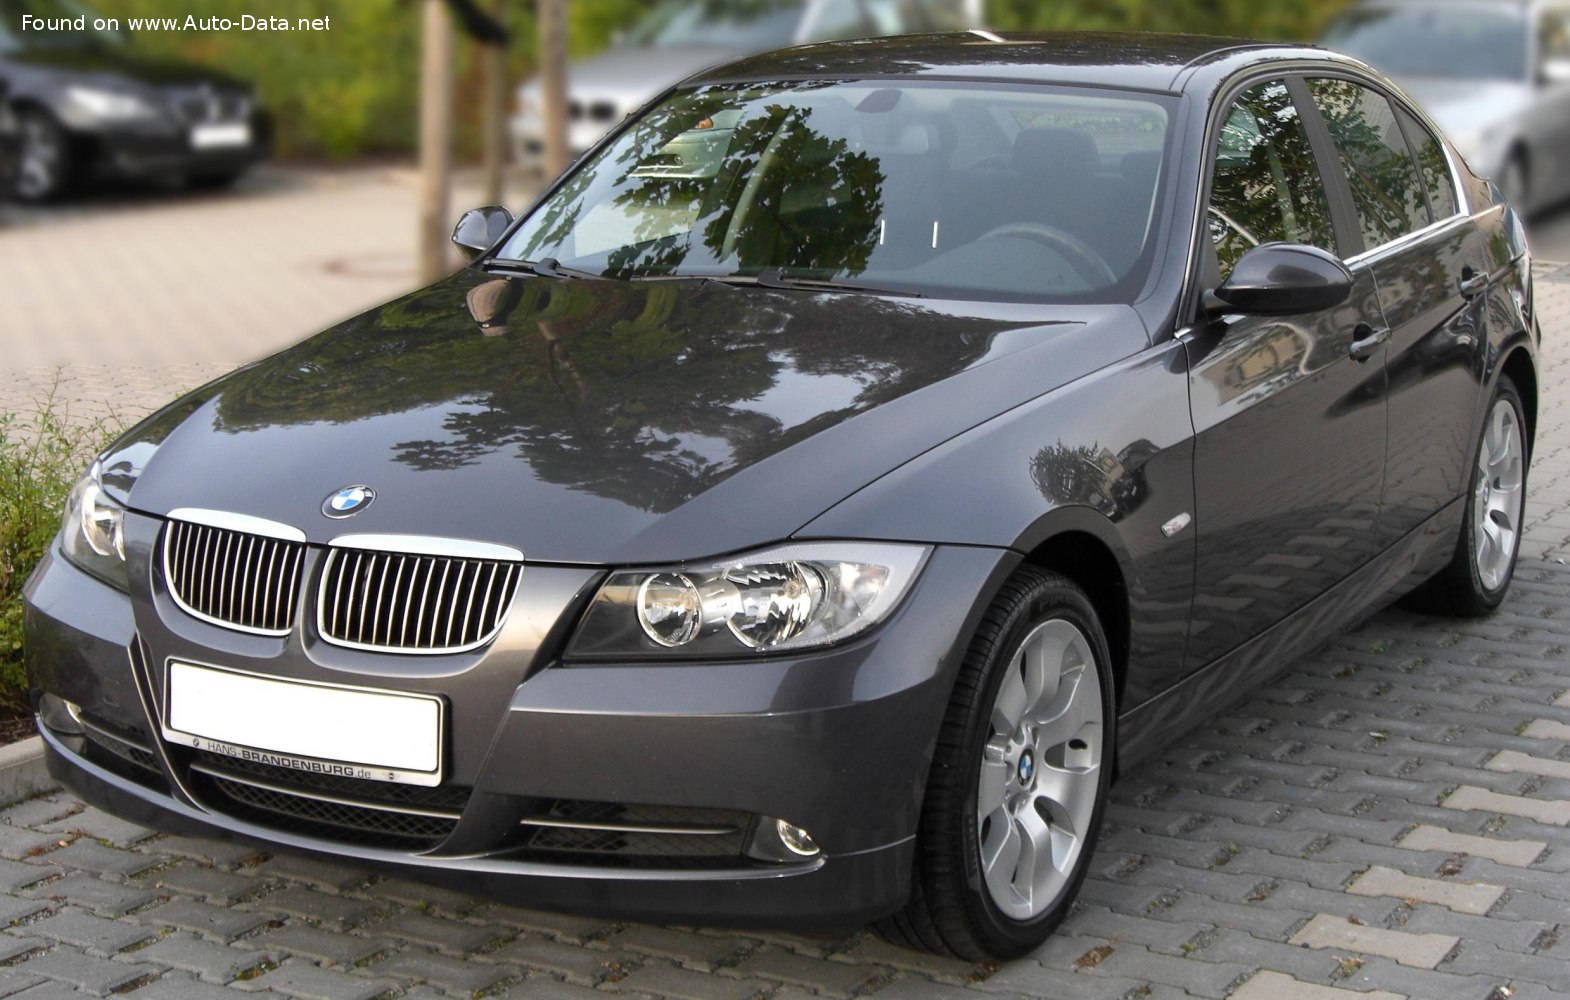 2005 BMW 3 Series Touring (E91) 325i (218 Hp)  Technical specs, data, fuel  consumption, Dimensions